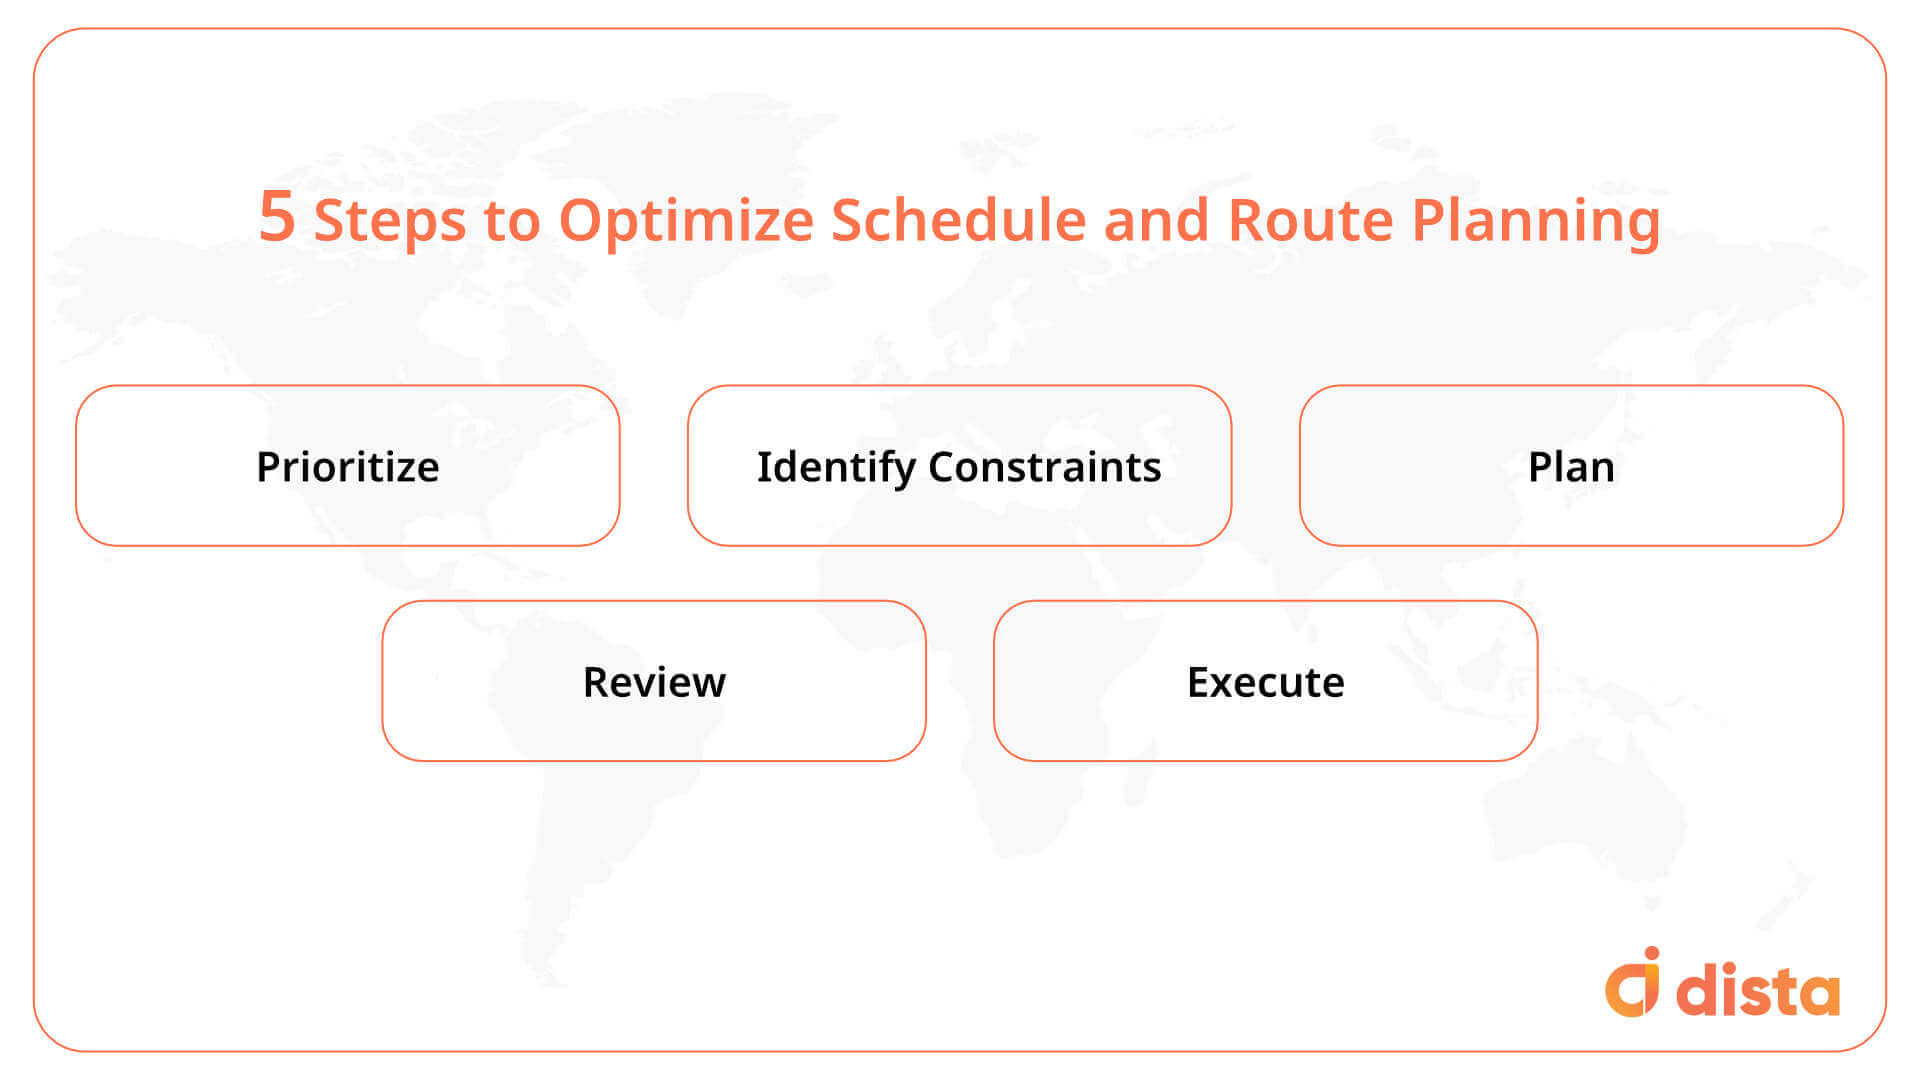 5 Steps to Optimize Schedule and Route Planning